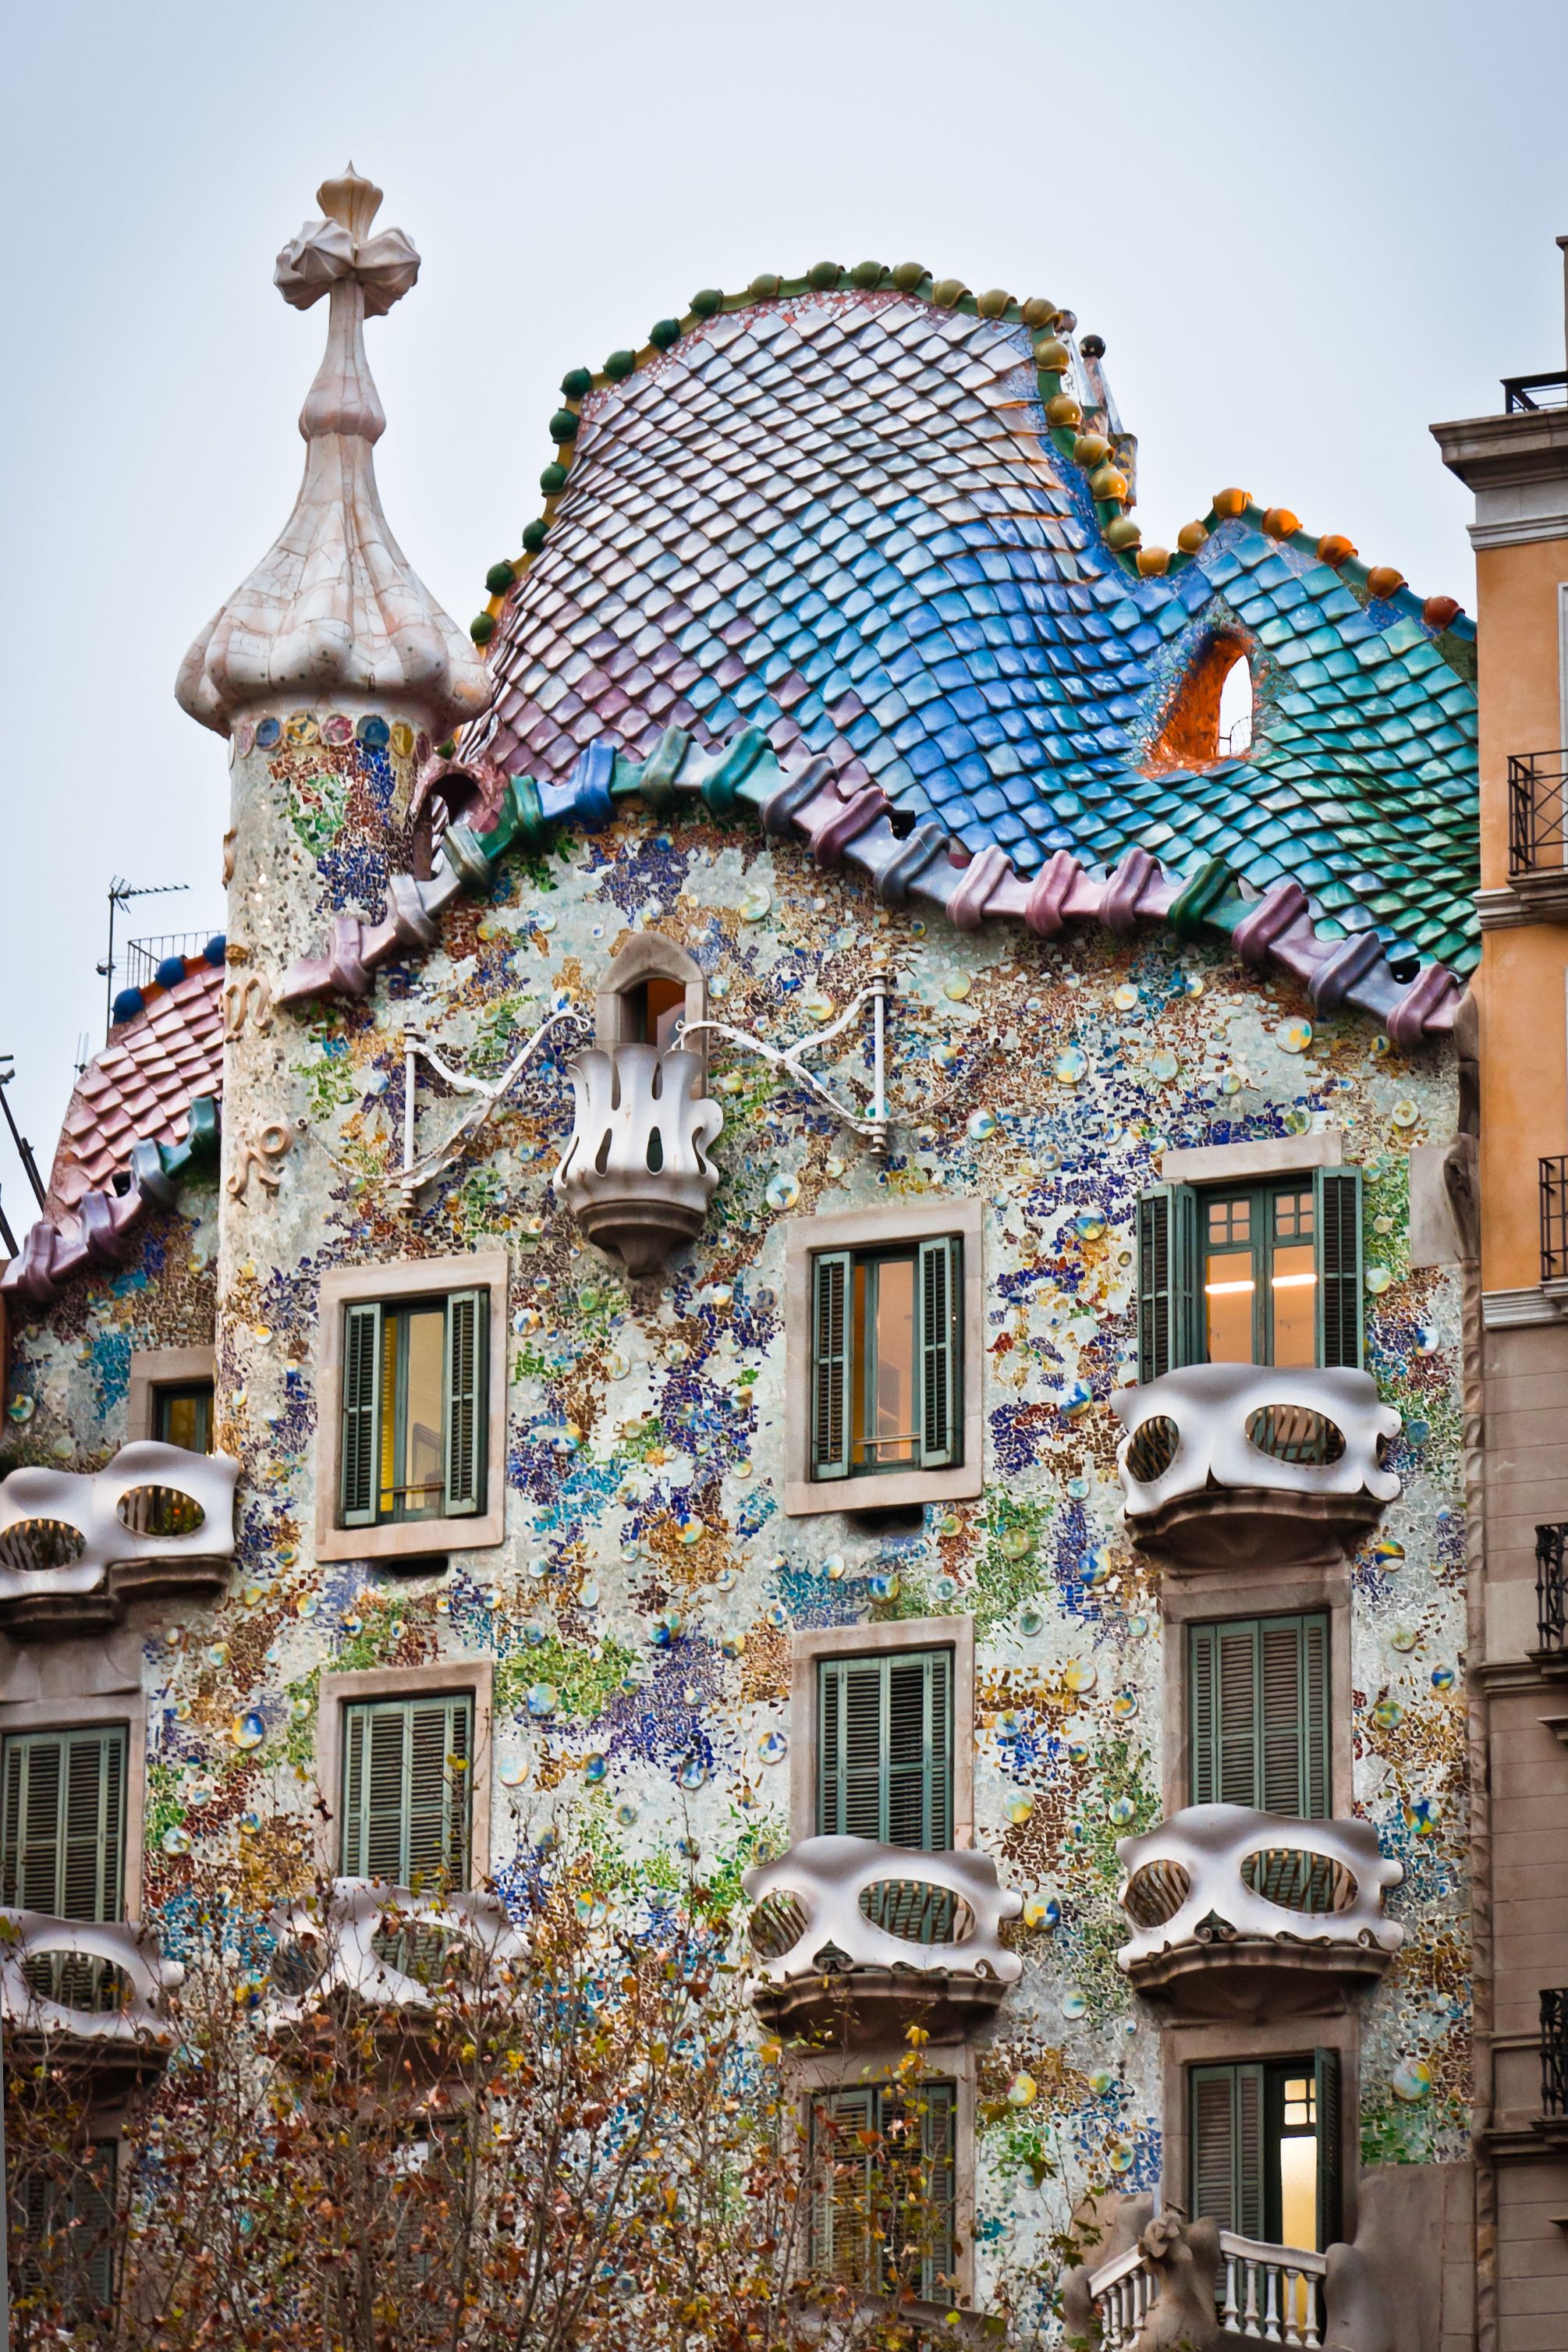 Antoni Gaudí Architecture in Barcelona - Town & Country